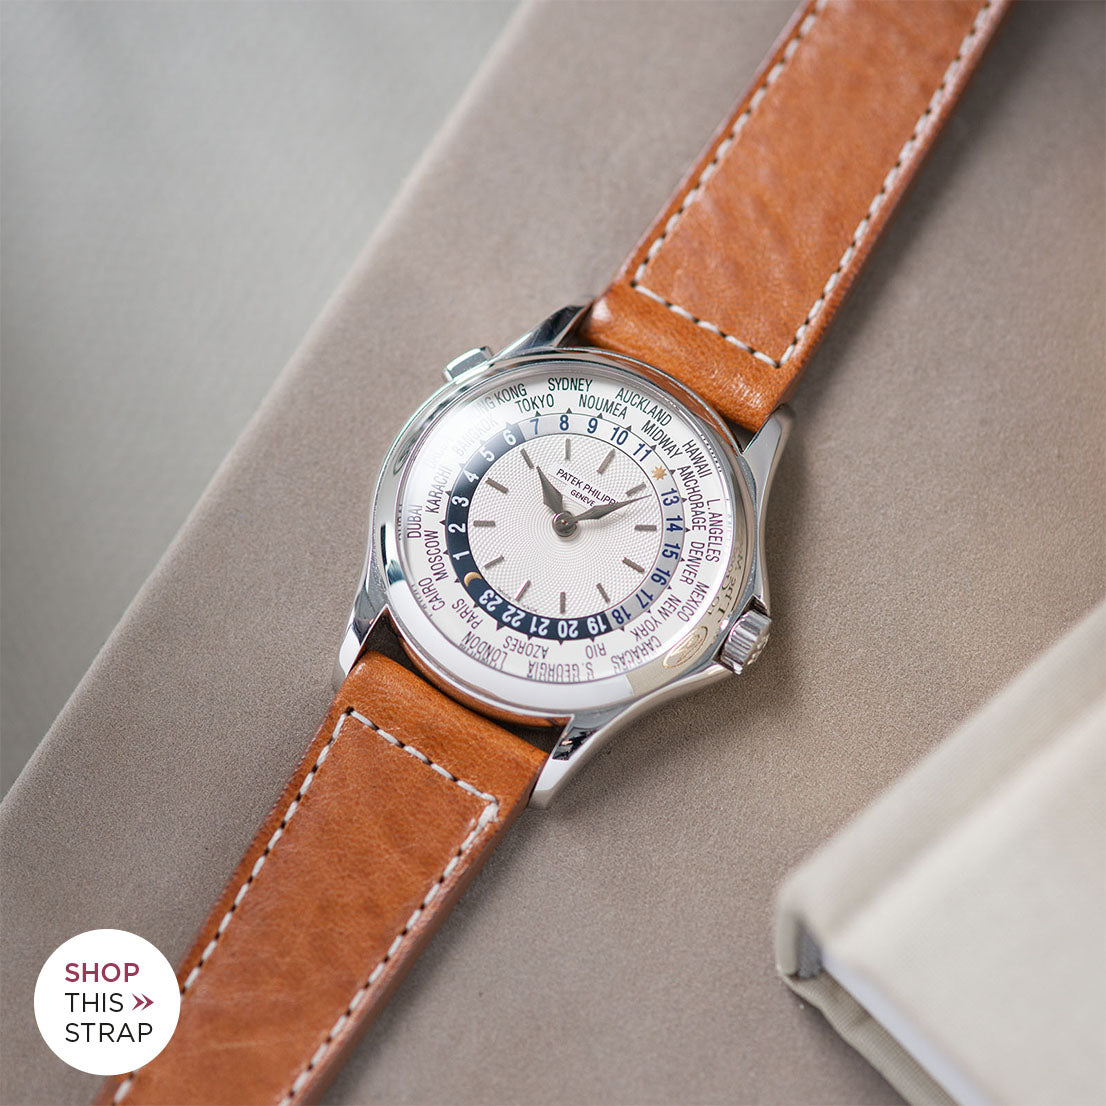 Bulang and Sons_Strap Guide _Patek Philippe 5110G White Gold World Time_Gilt Brown Leather Watch Strap